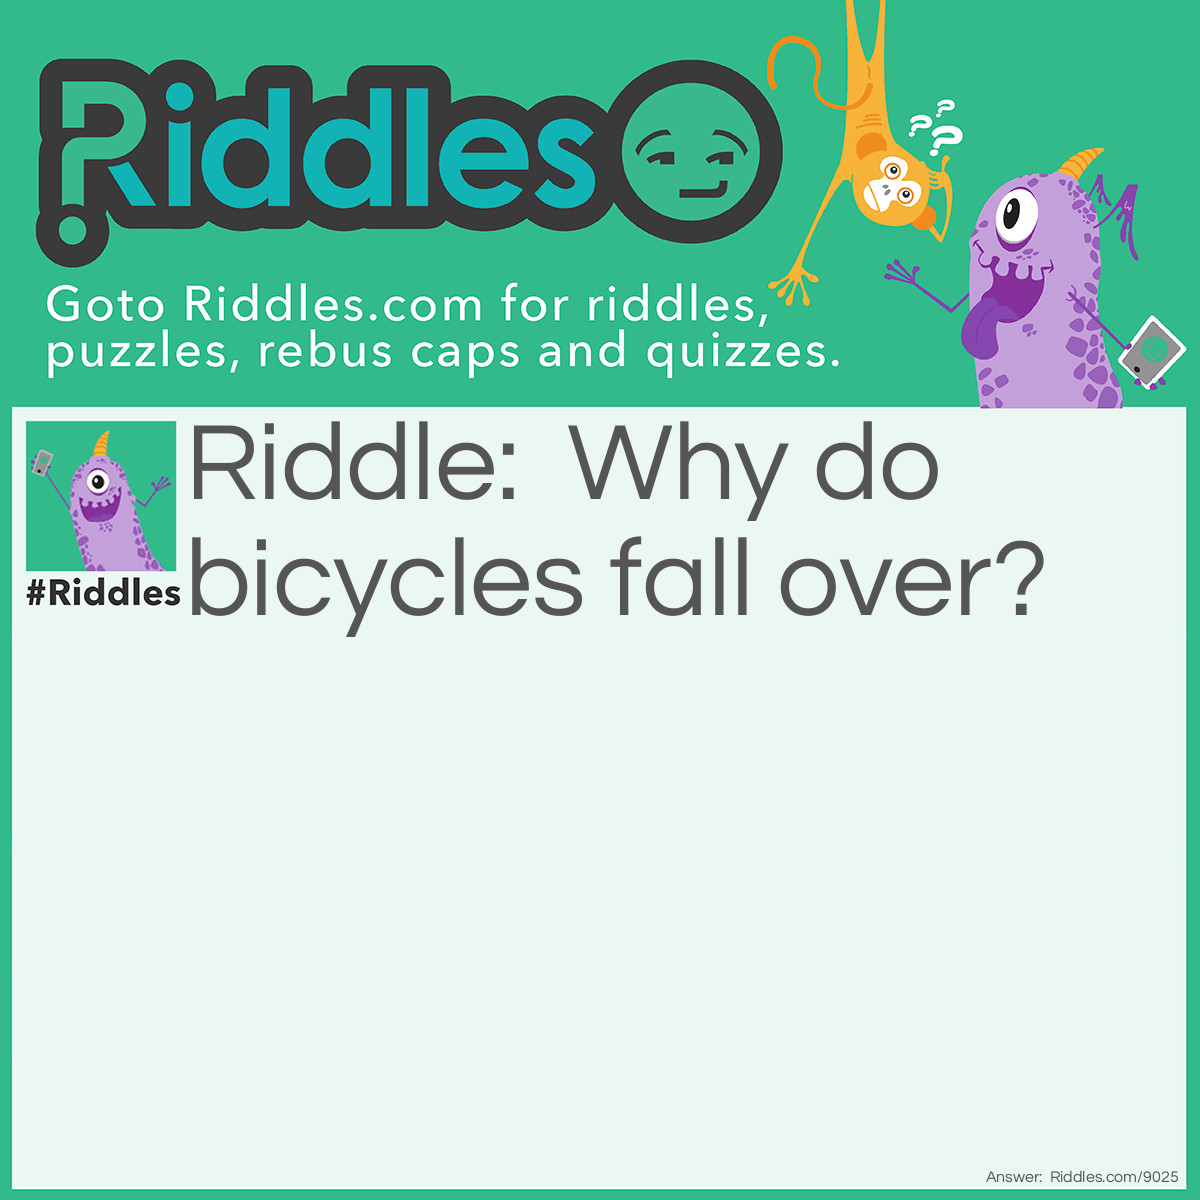 Riddle: Why do bicycles fall over? Answer: Because they are two-tired!